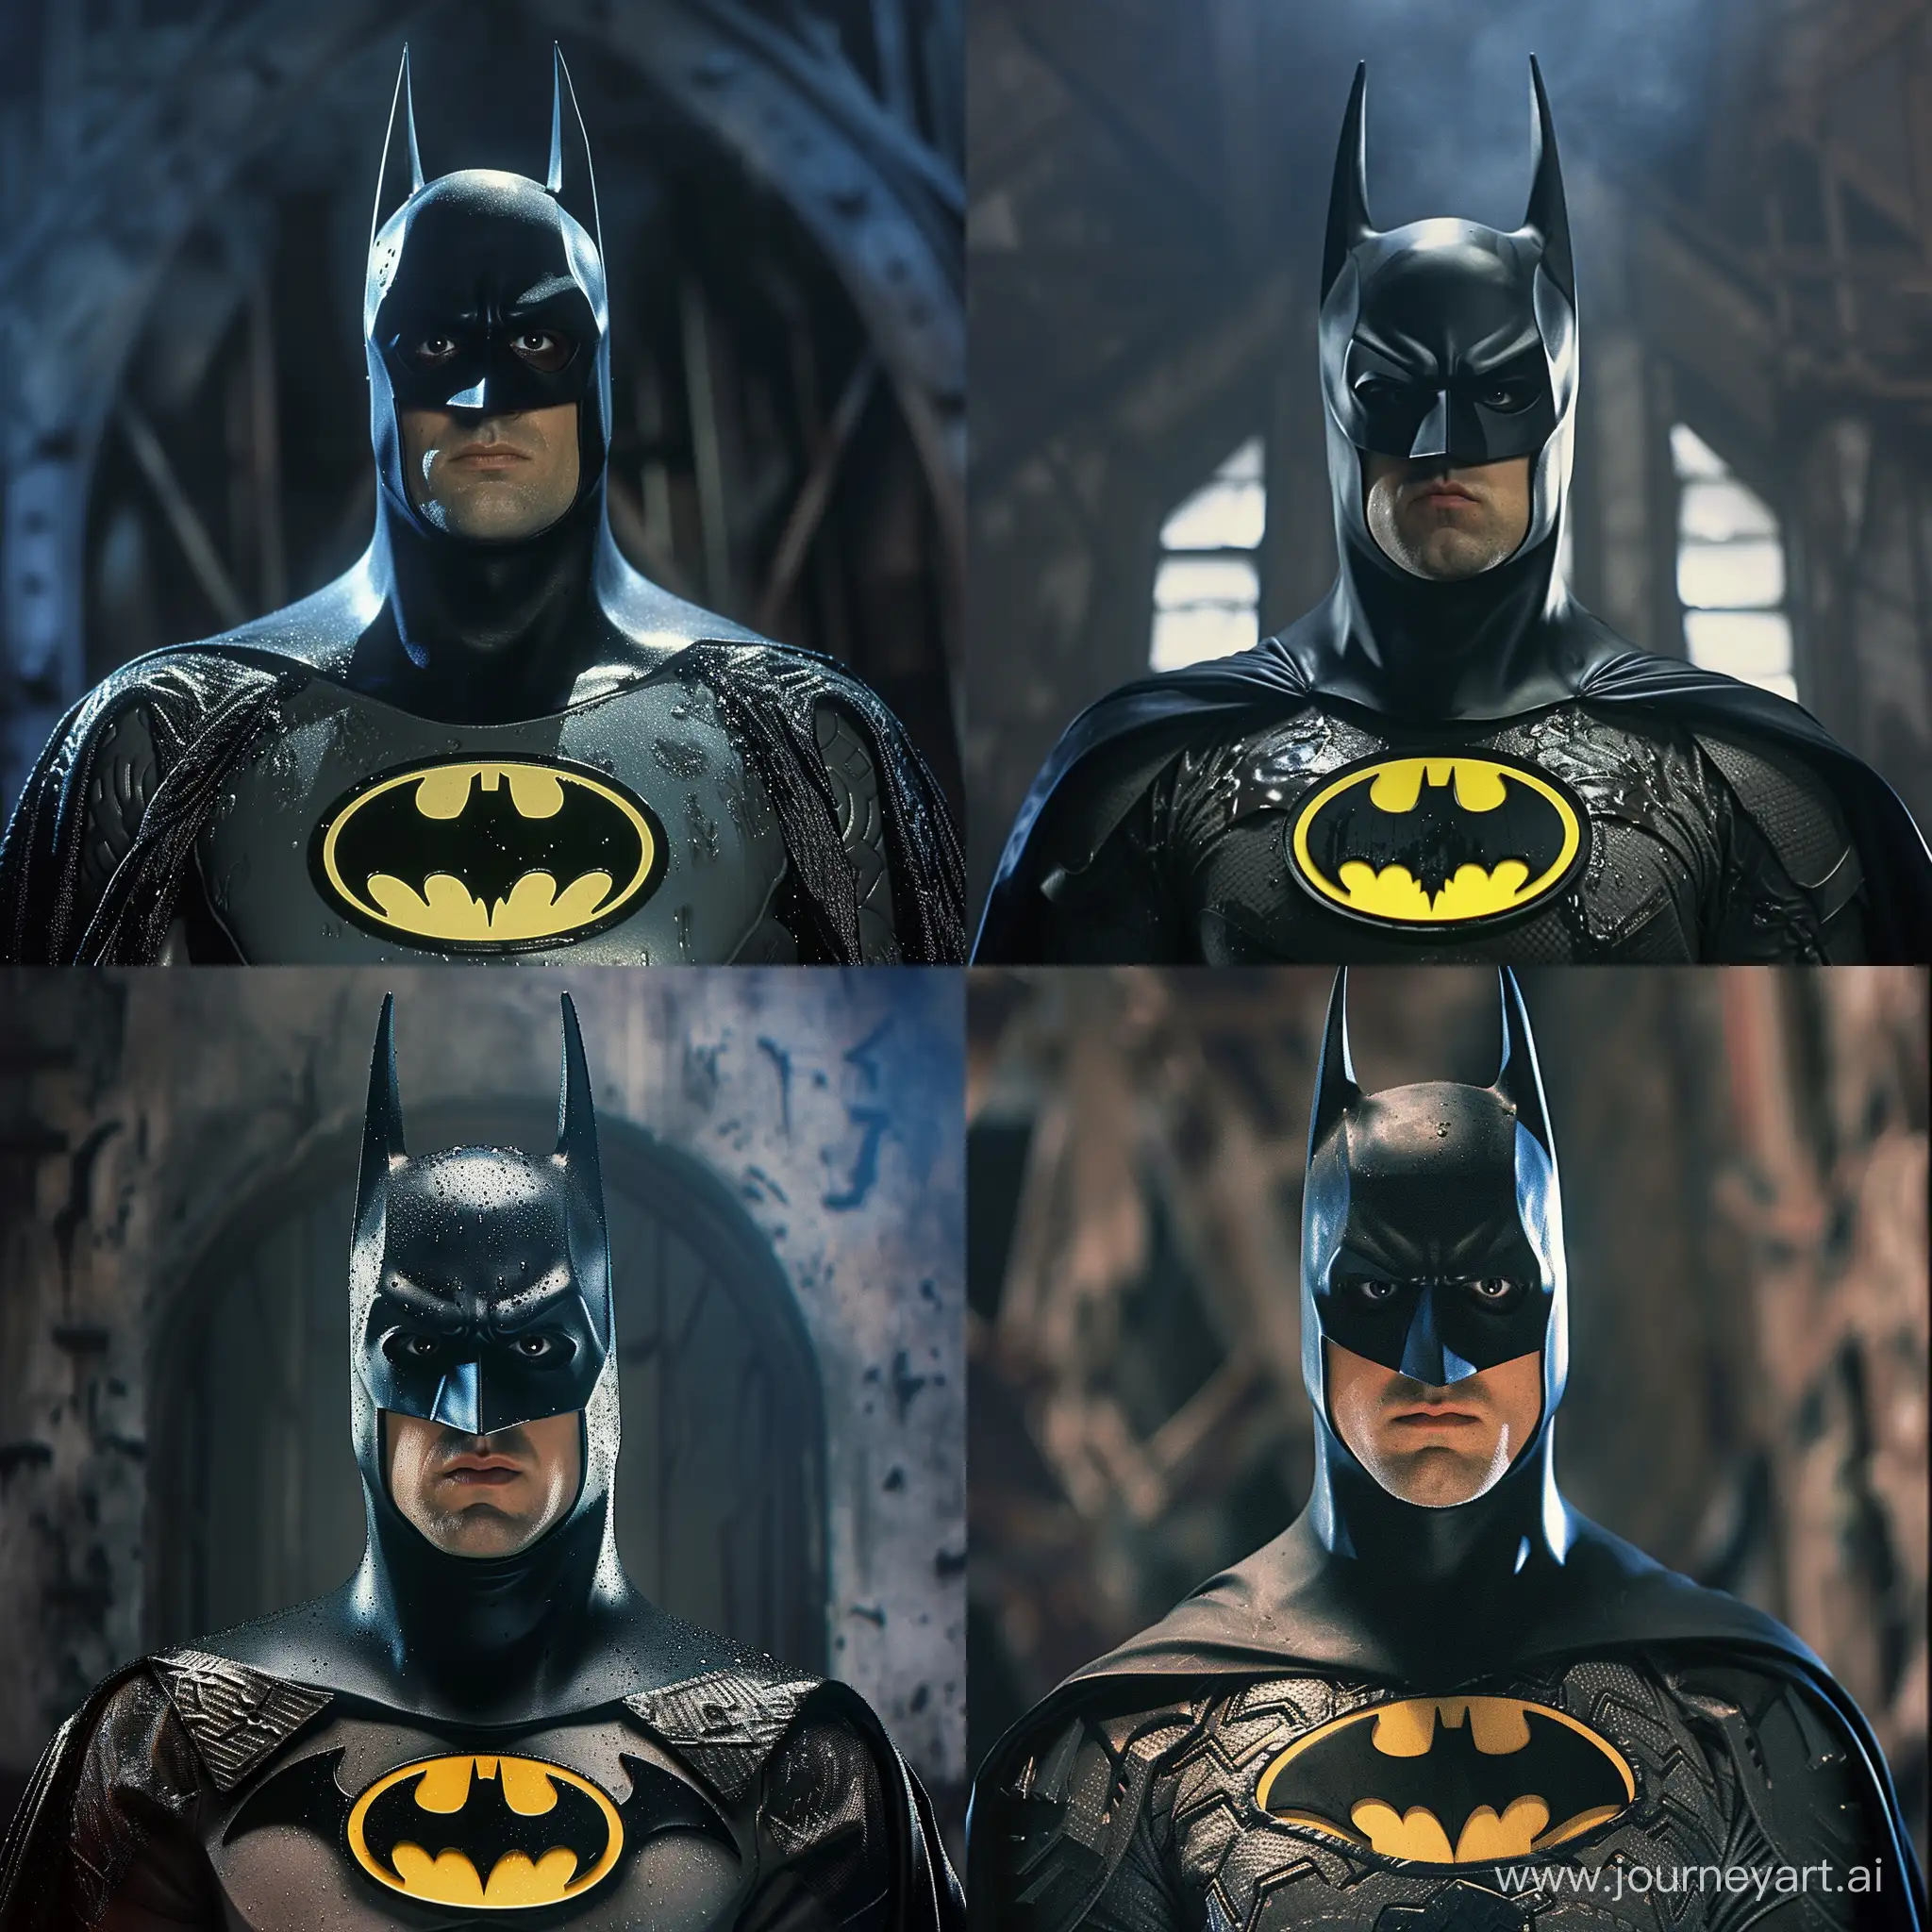 a close-up of  Batman 1989 costume, featuring the iconic cowl with the bat ears and the opening for the eyes and lower part of the face. The character's expression is serious or stern, consistent with the typical portrayal of Batman as a determined and intense superhero. The costume appears to be made of a material that mimics the texture of armor, likely symbolizing Batman's readiness to face danger. The lighting is dim, suggesting a dark or nighttime setting, which is characteristic of the Gotham City environment where Batman often operates. The background is blurred and not clearly discernible, but it seems to be a gloomy and possibly industrial setting, adding to the overall dark and gritty atmosphere often associated with Batman media.